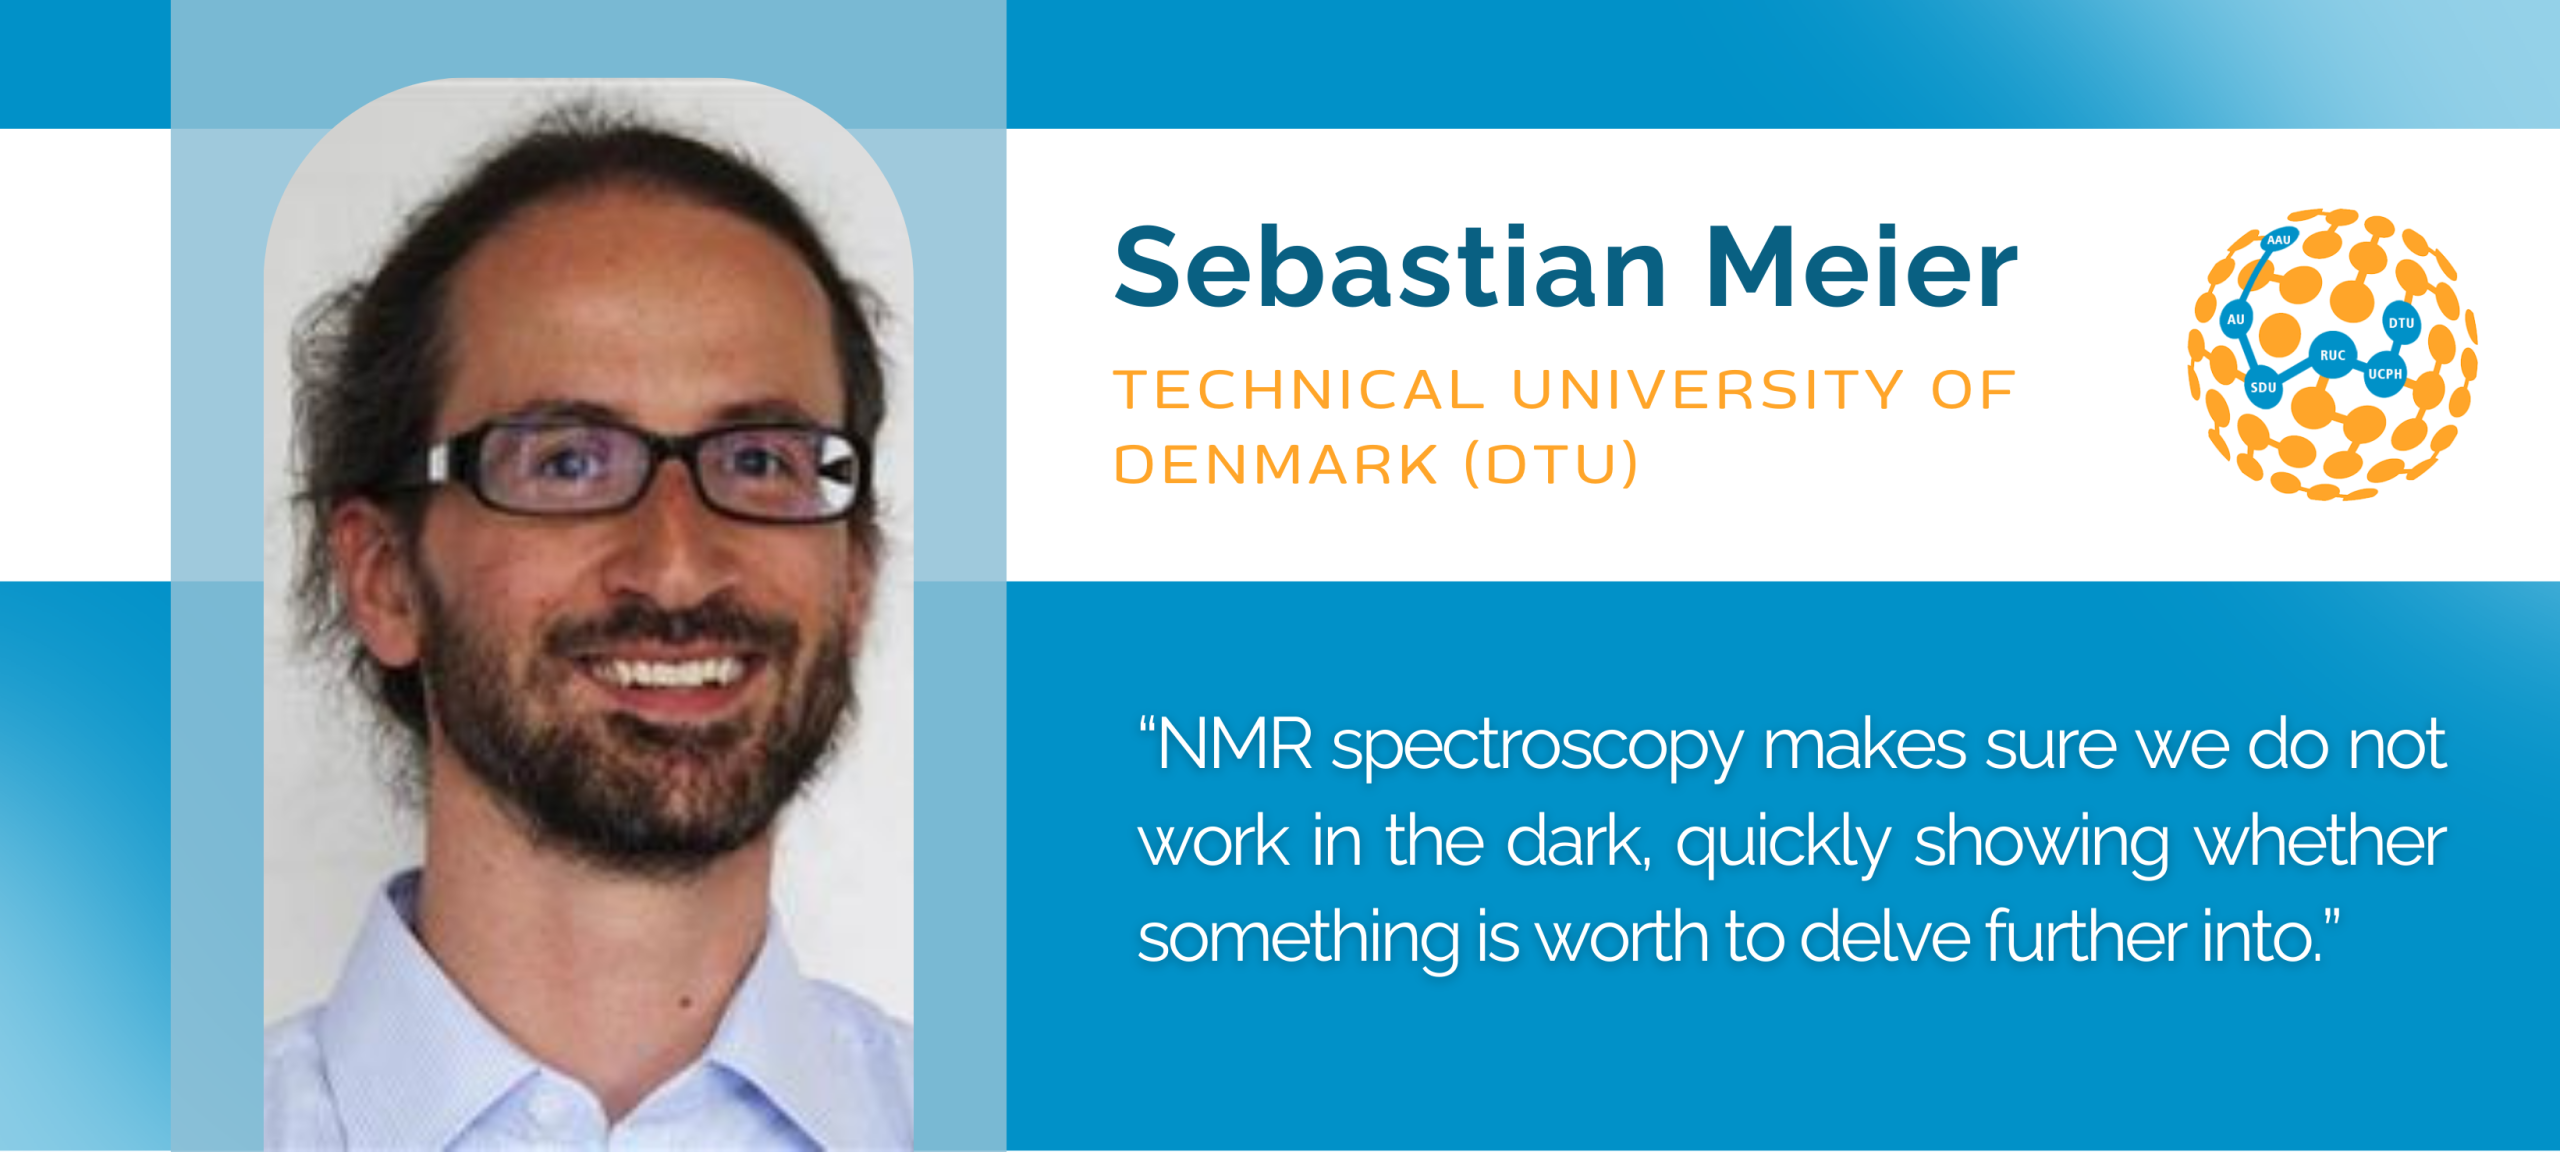 NMR spectroscopy can help the sustainable sciences catch up